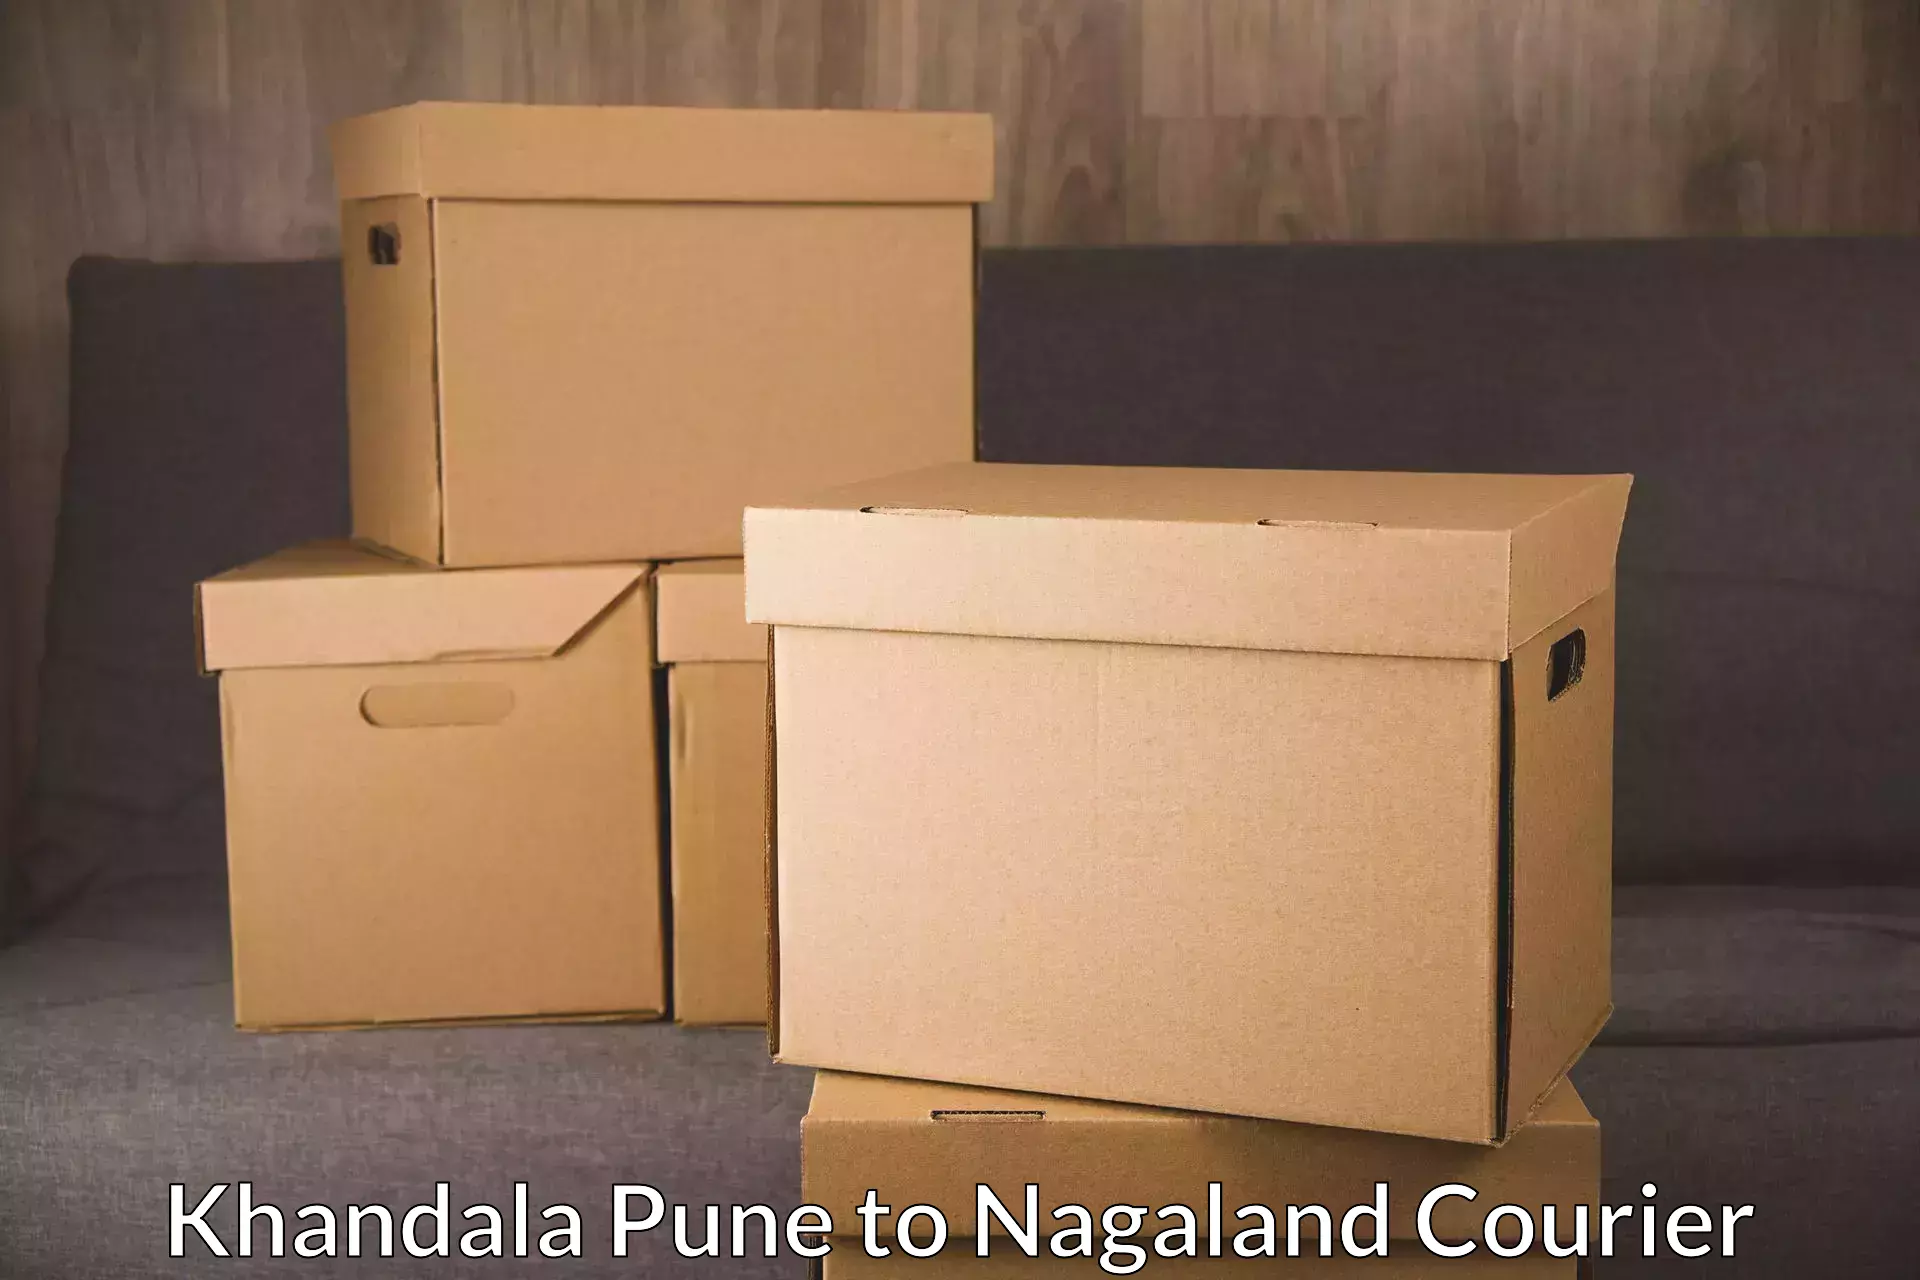 Parcel handling and care in Khandala Pune to Nagaland